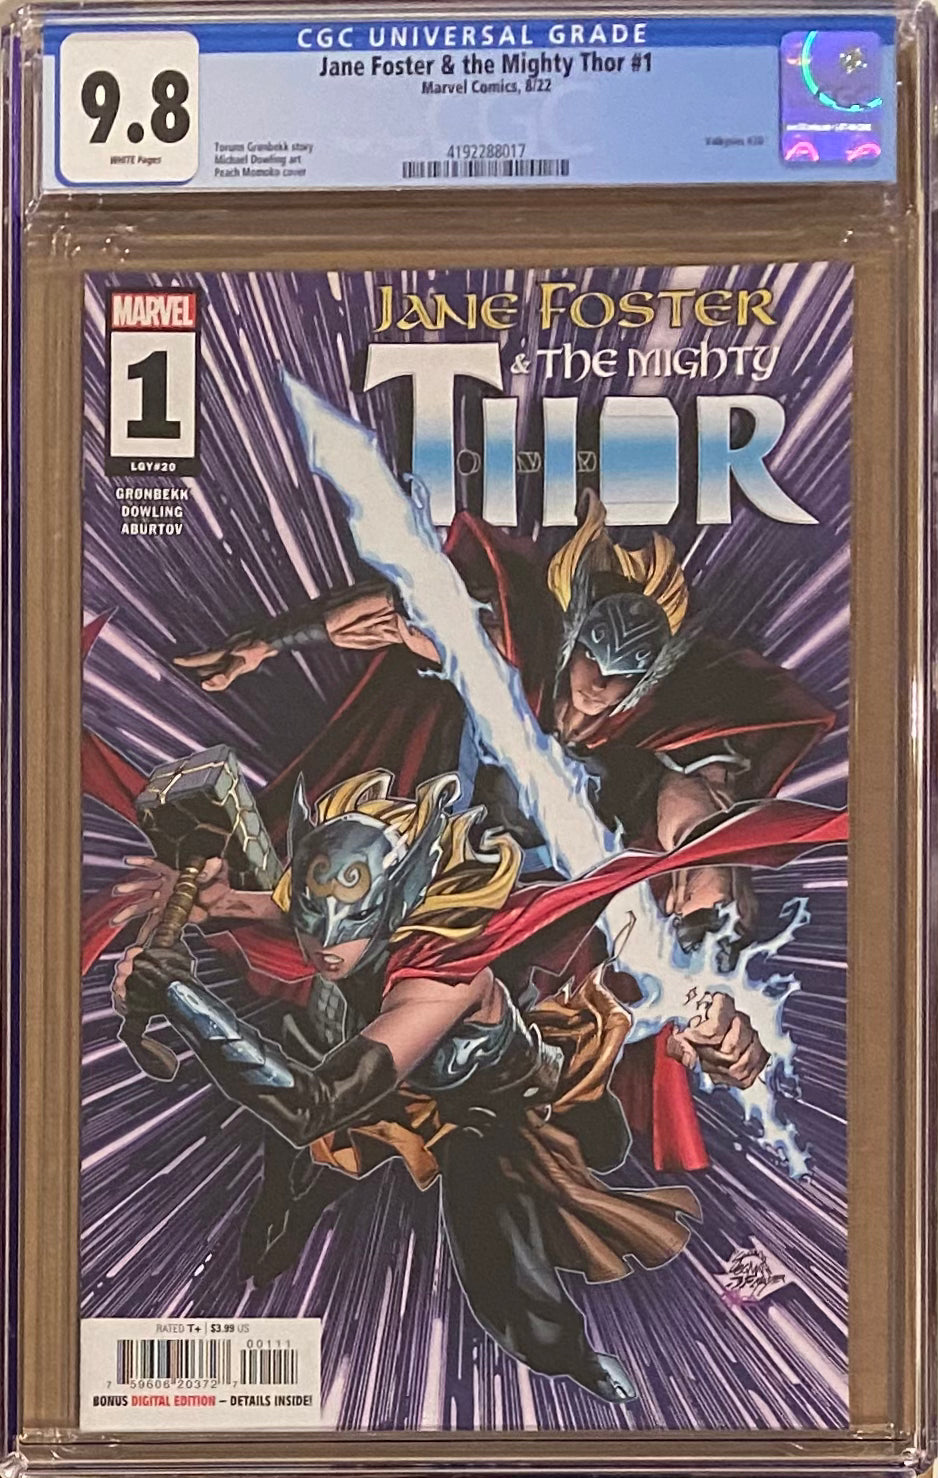 Jane Foster & The Mighty Thor #1 CGC 9.8